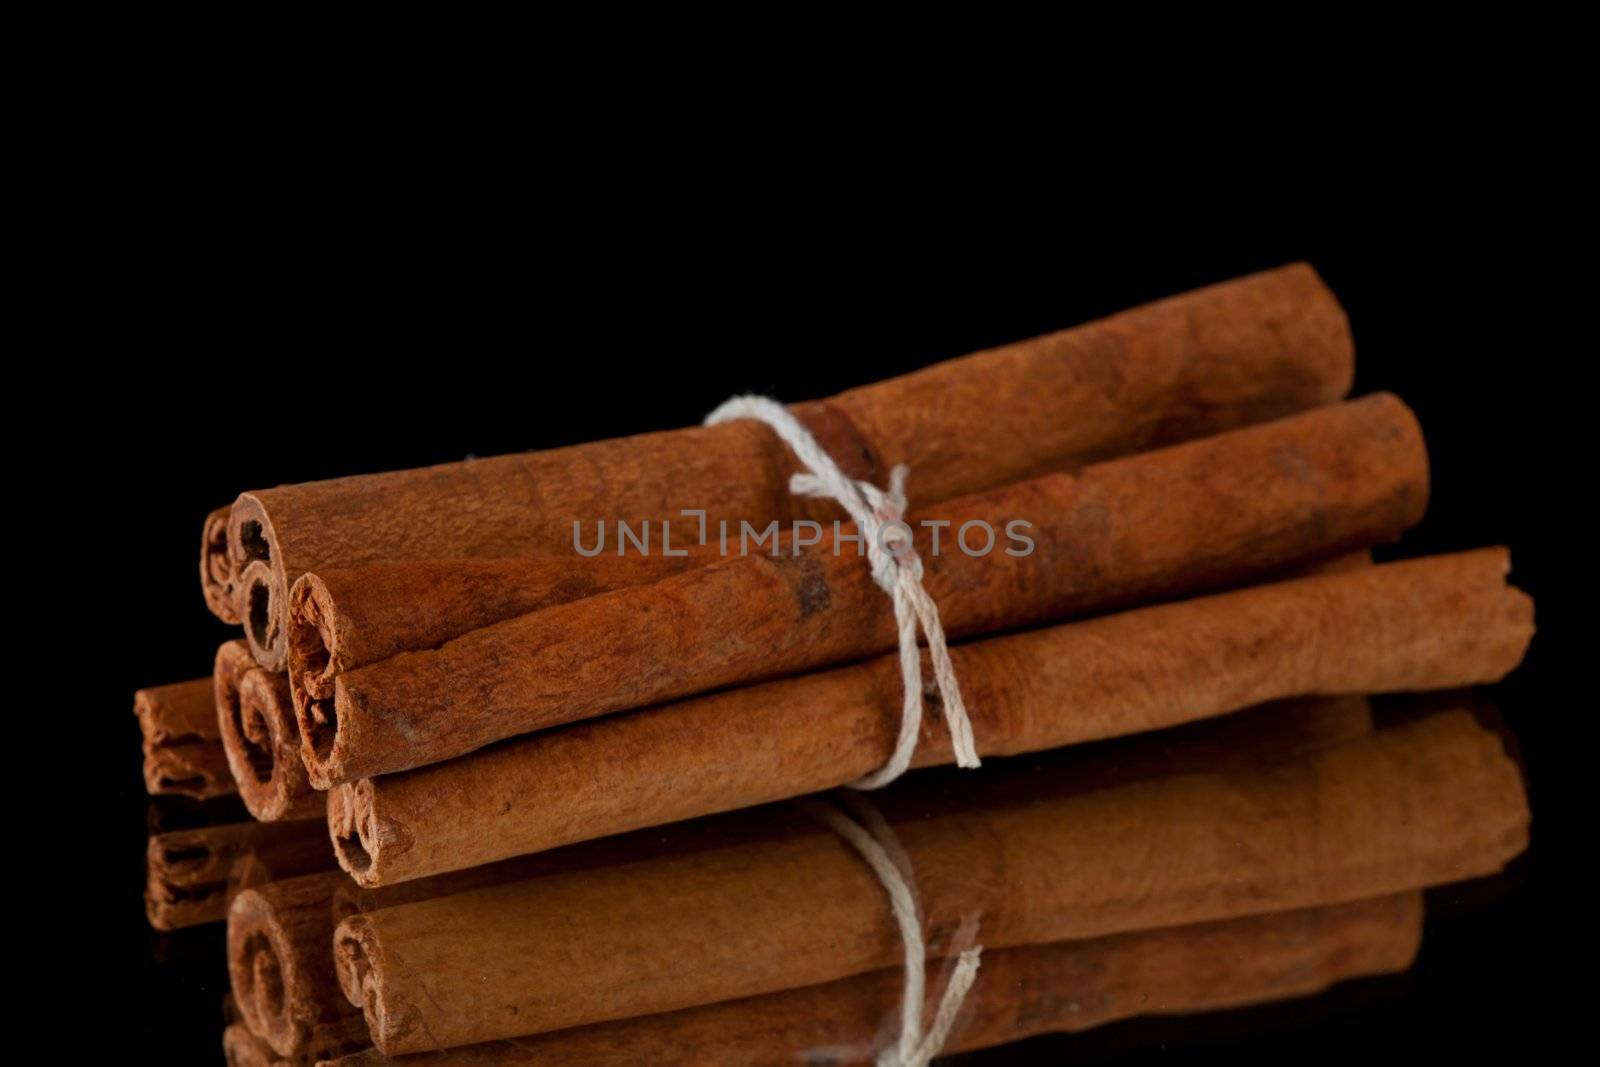 Cinnamon sticks packed together against a black background